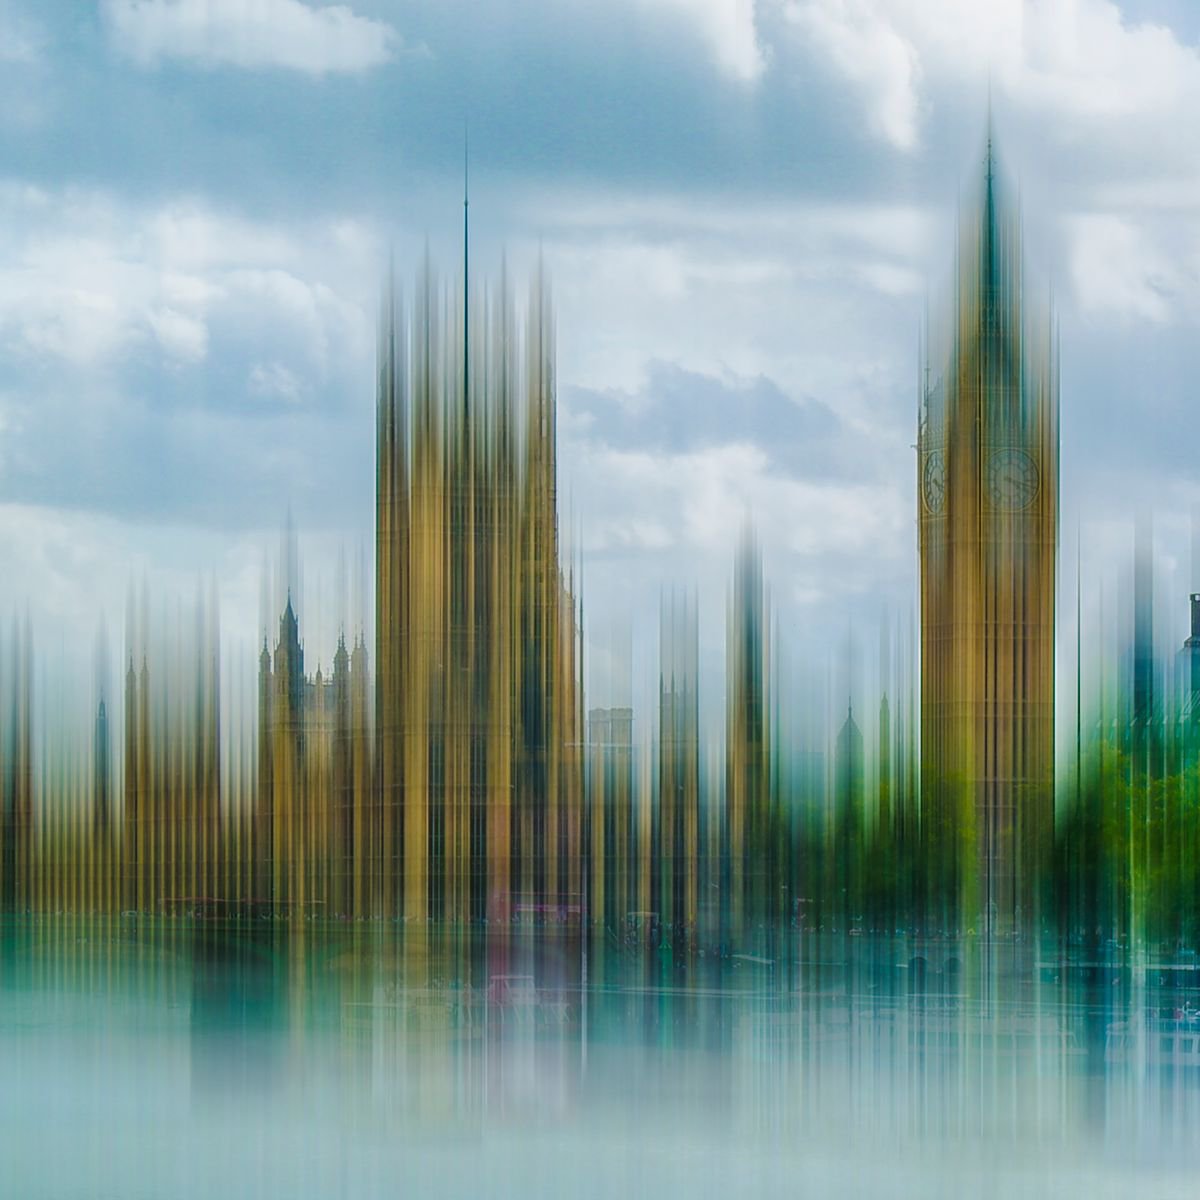 Abstract London: Houses of Parliament by Graham Briggs